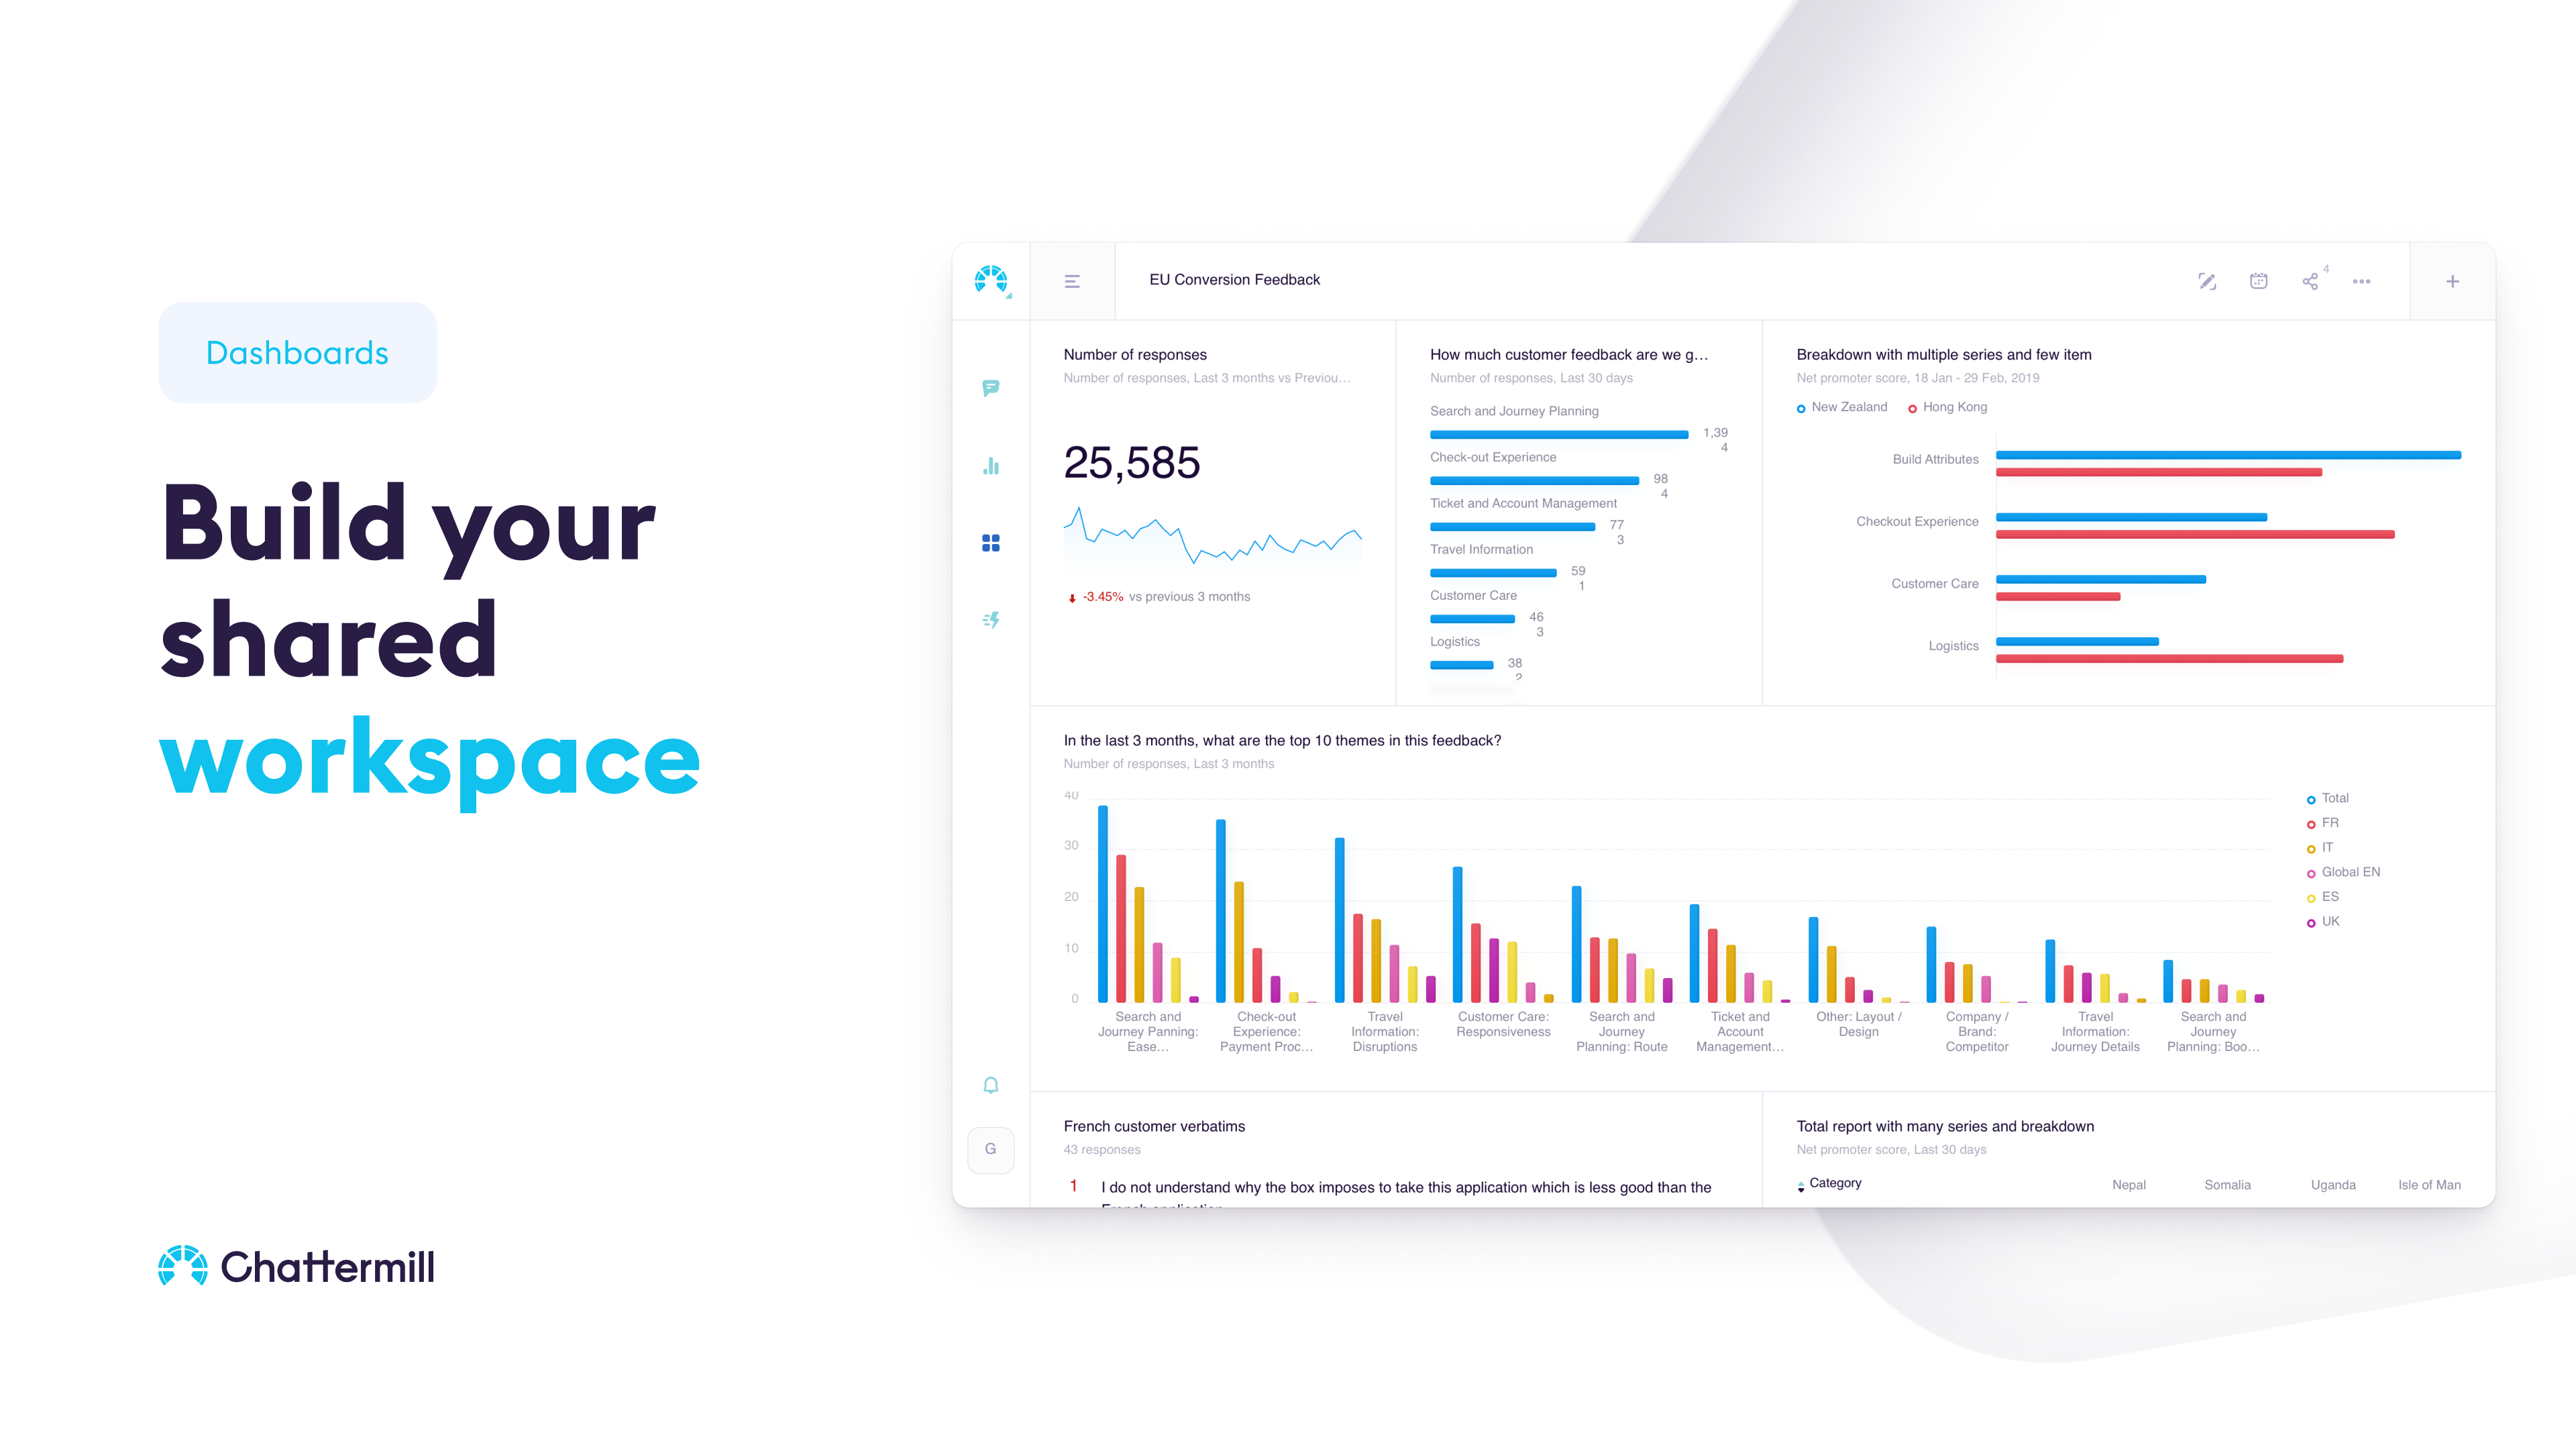 Creating a user-friendly dashboard for you and your team now takes seconds. Take your most important metrics, charts, and tables, and add them to your custom dashboard with a few clicks. You can build Dashboards for different areas of your business – CX,